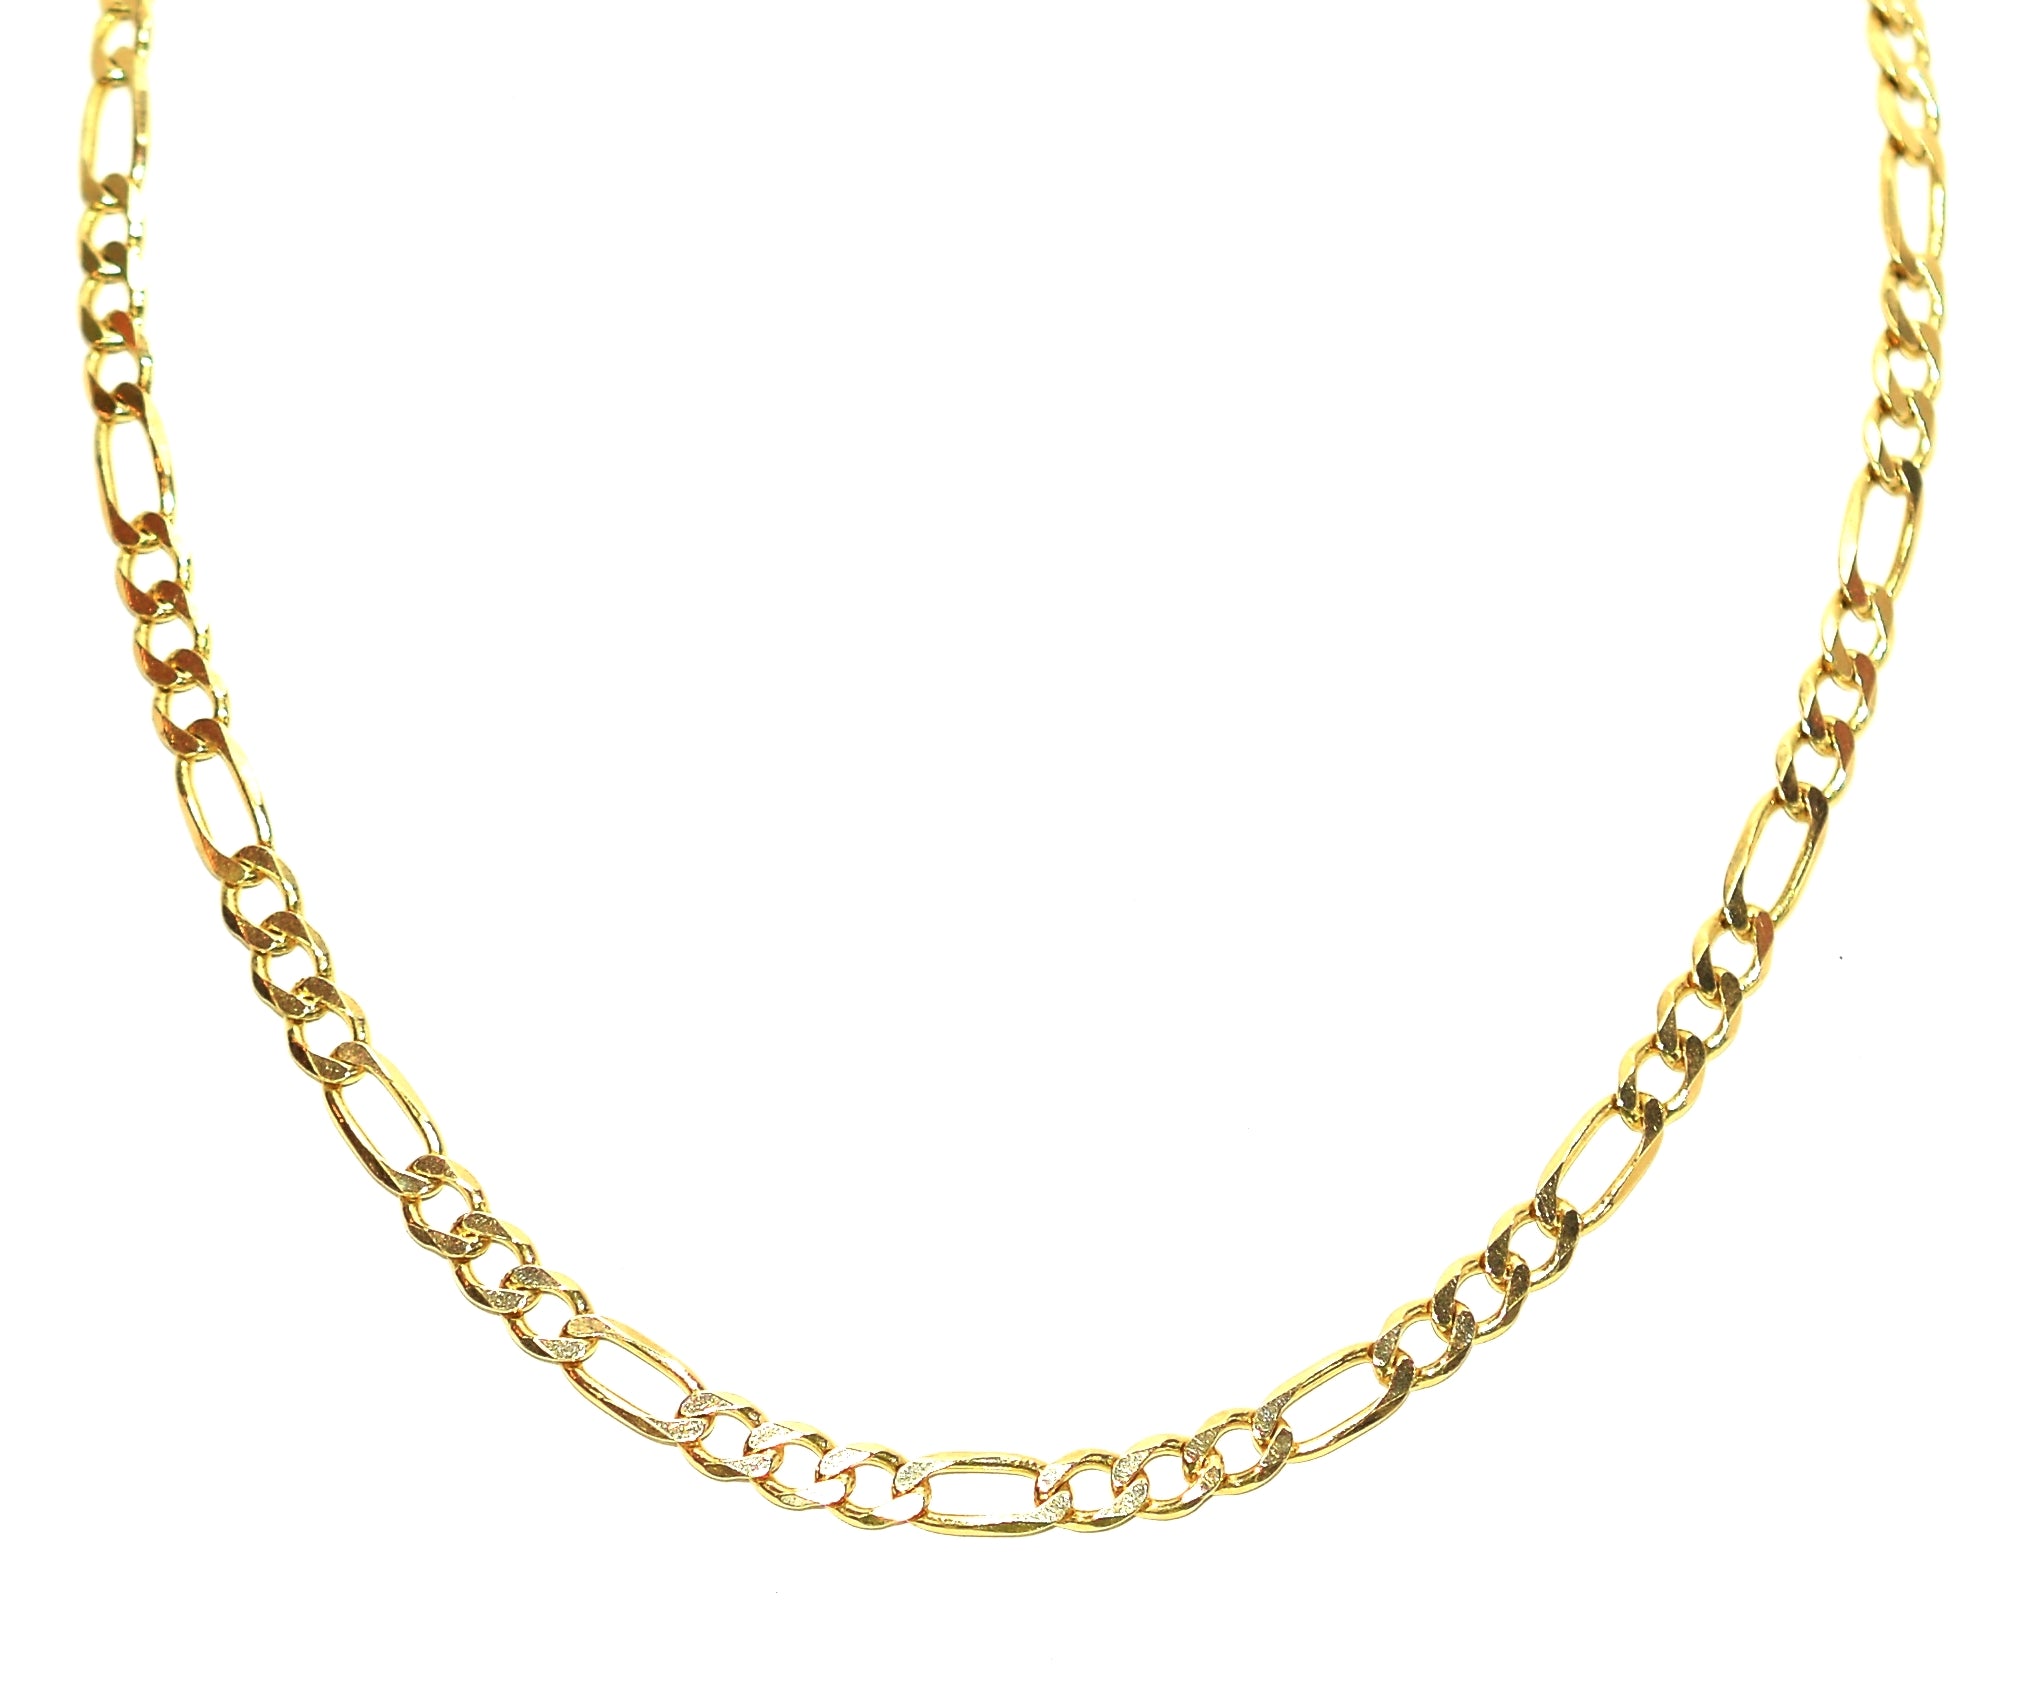 14K Solid Gold Figaro Chain Necklace 22" 3.25mm Fine Jewelry Gold Chain Vintage Necklace Estate Necklace Gold Necklace Chain Necklace Fine